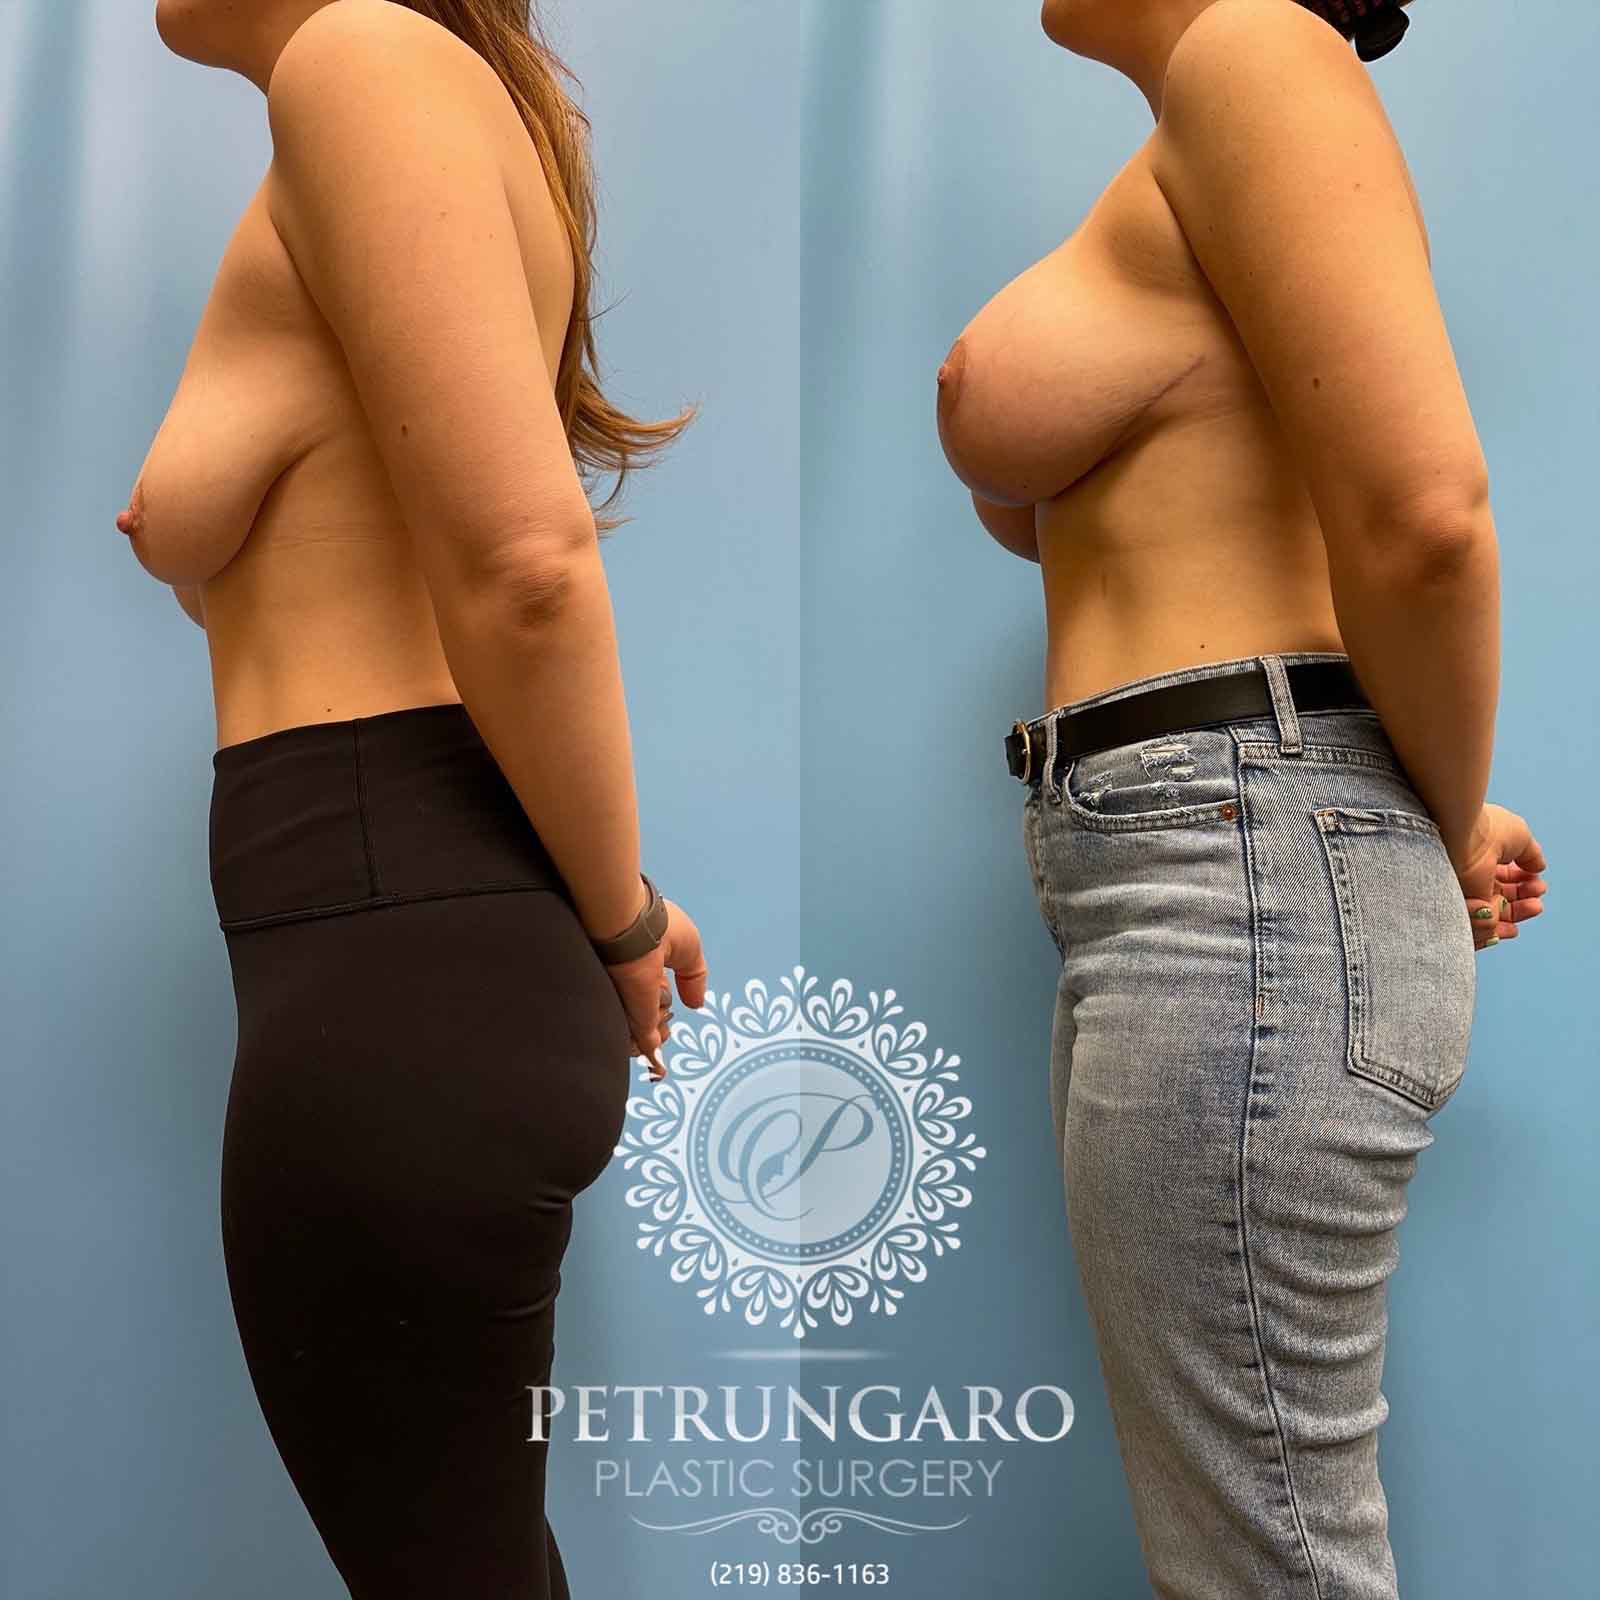 anchor-pattern-breast-lift-implants-natrelle-inspira-before-after-2